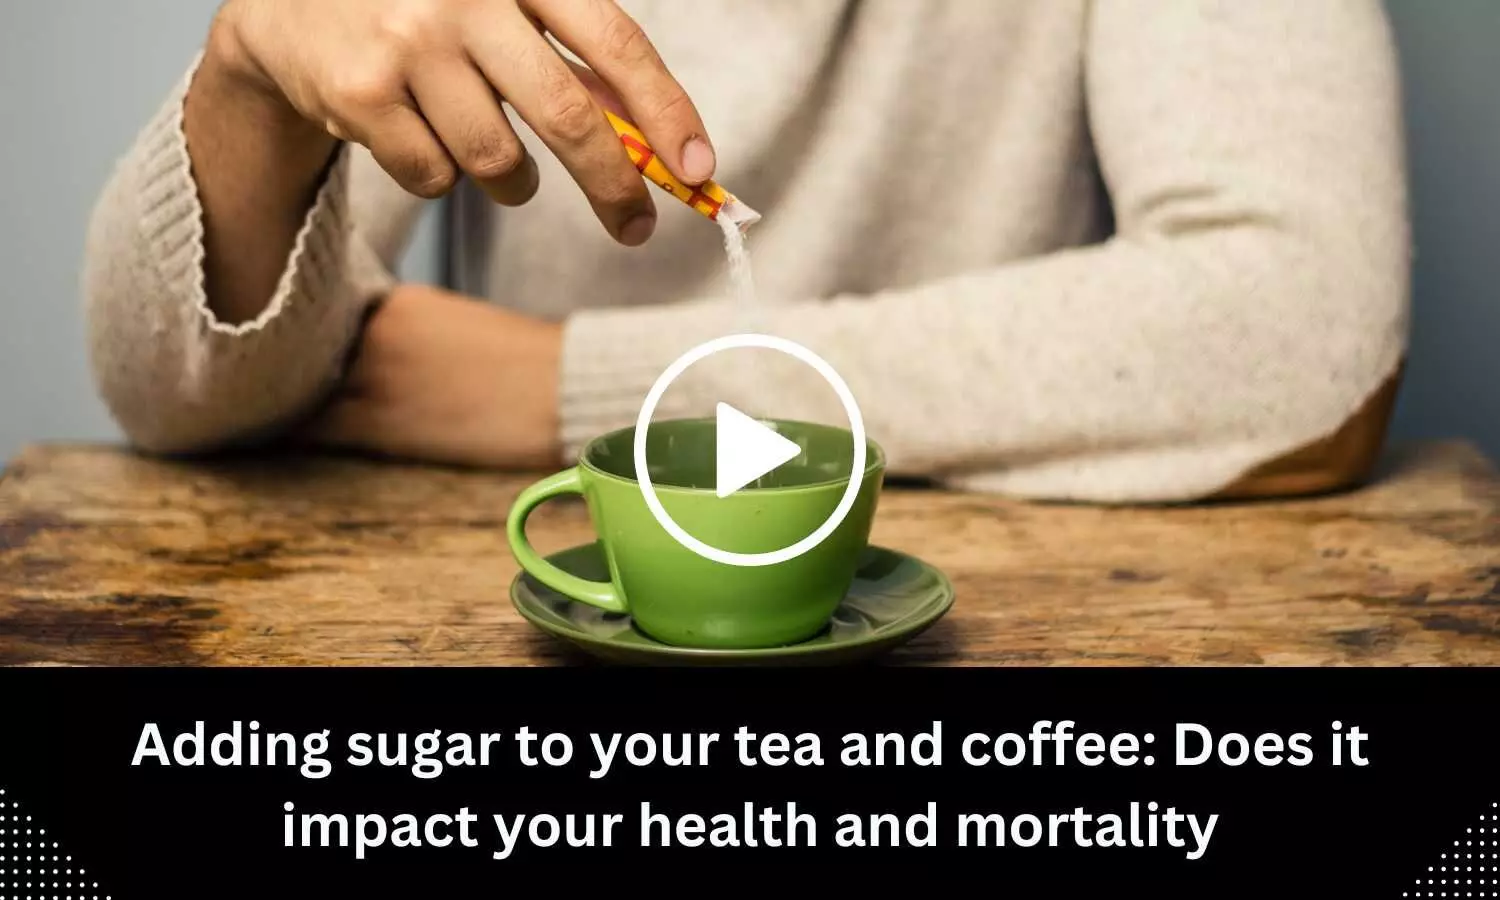 Adding sugar to your tea and coffee: Does it impact your health and mortality